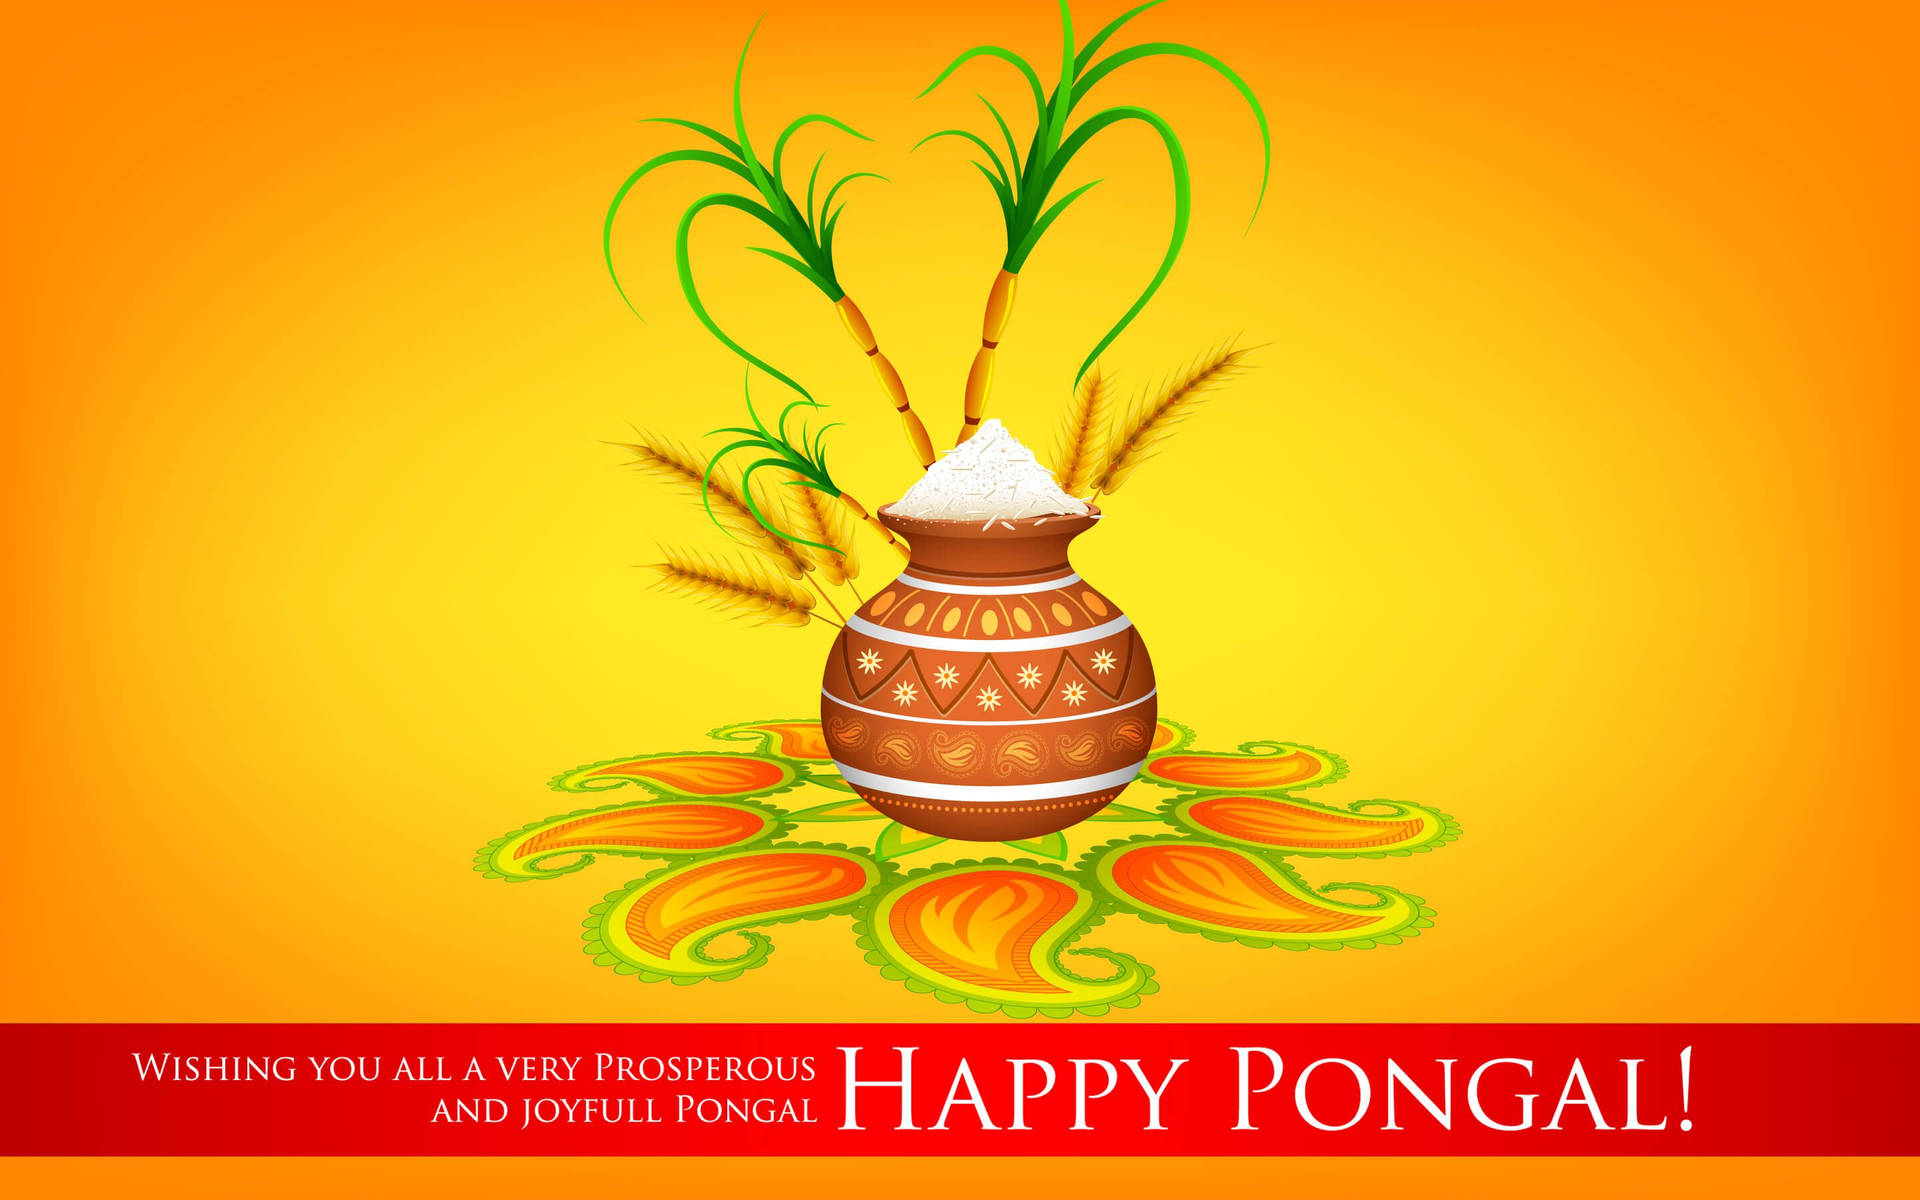 Gladpongal Gratulationer. (note: This Translation Is A Direct Translation Of The Phrase 